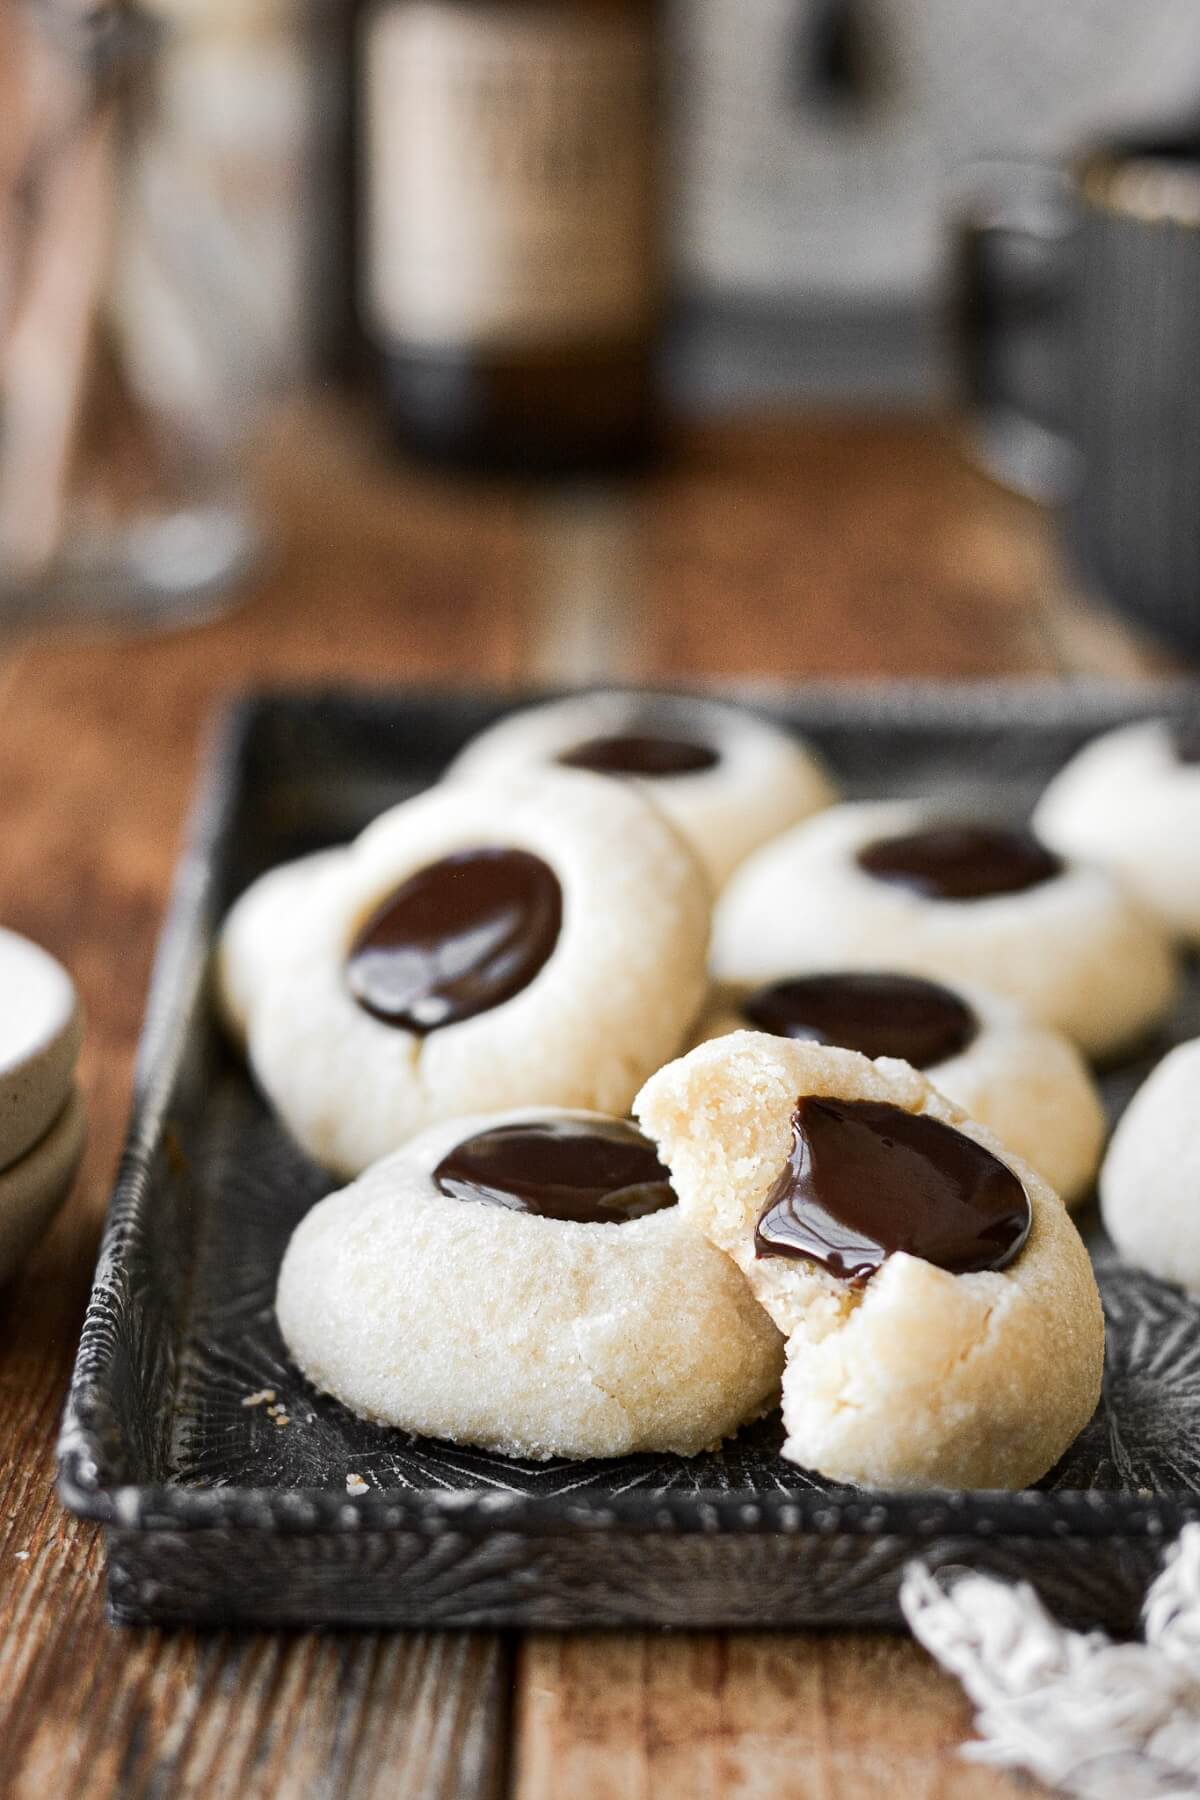 Chocolate thumbprint sugar cookies filled with ganache.